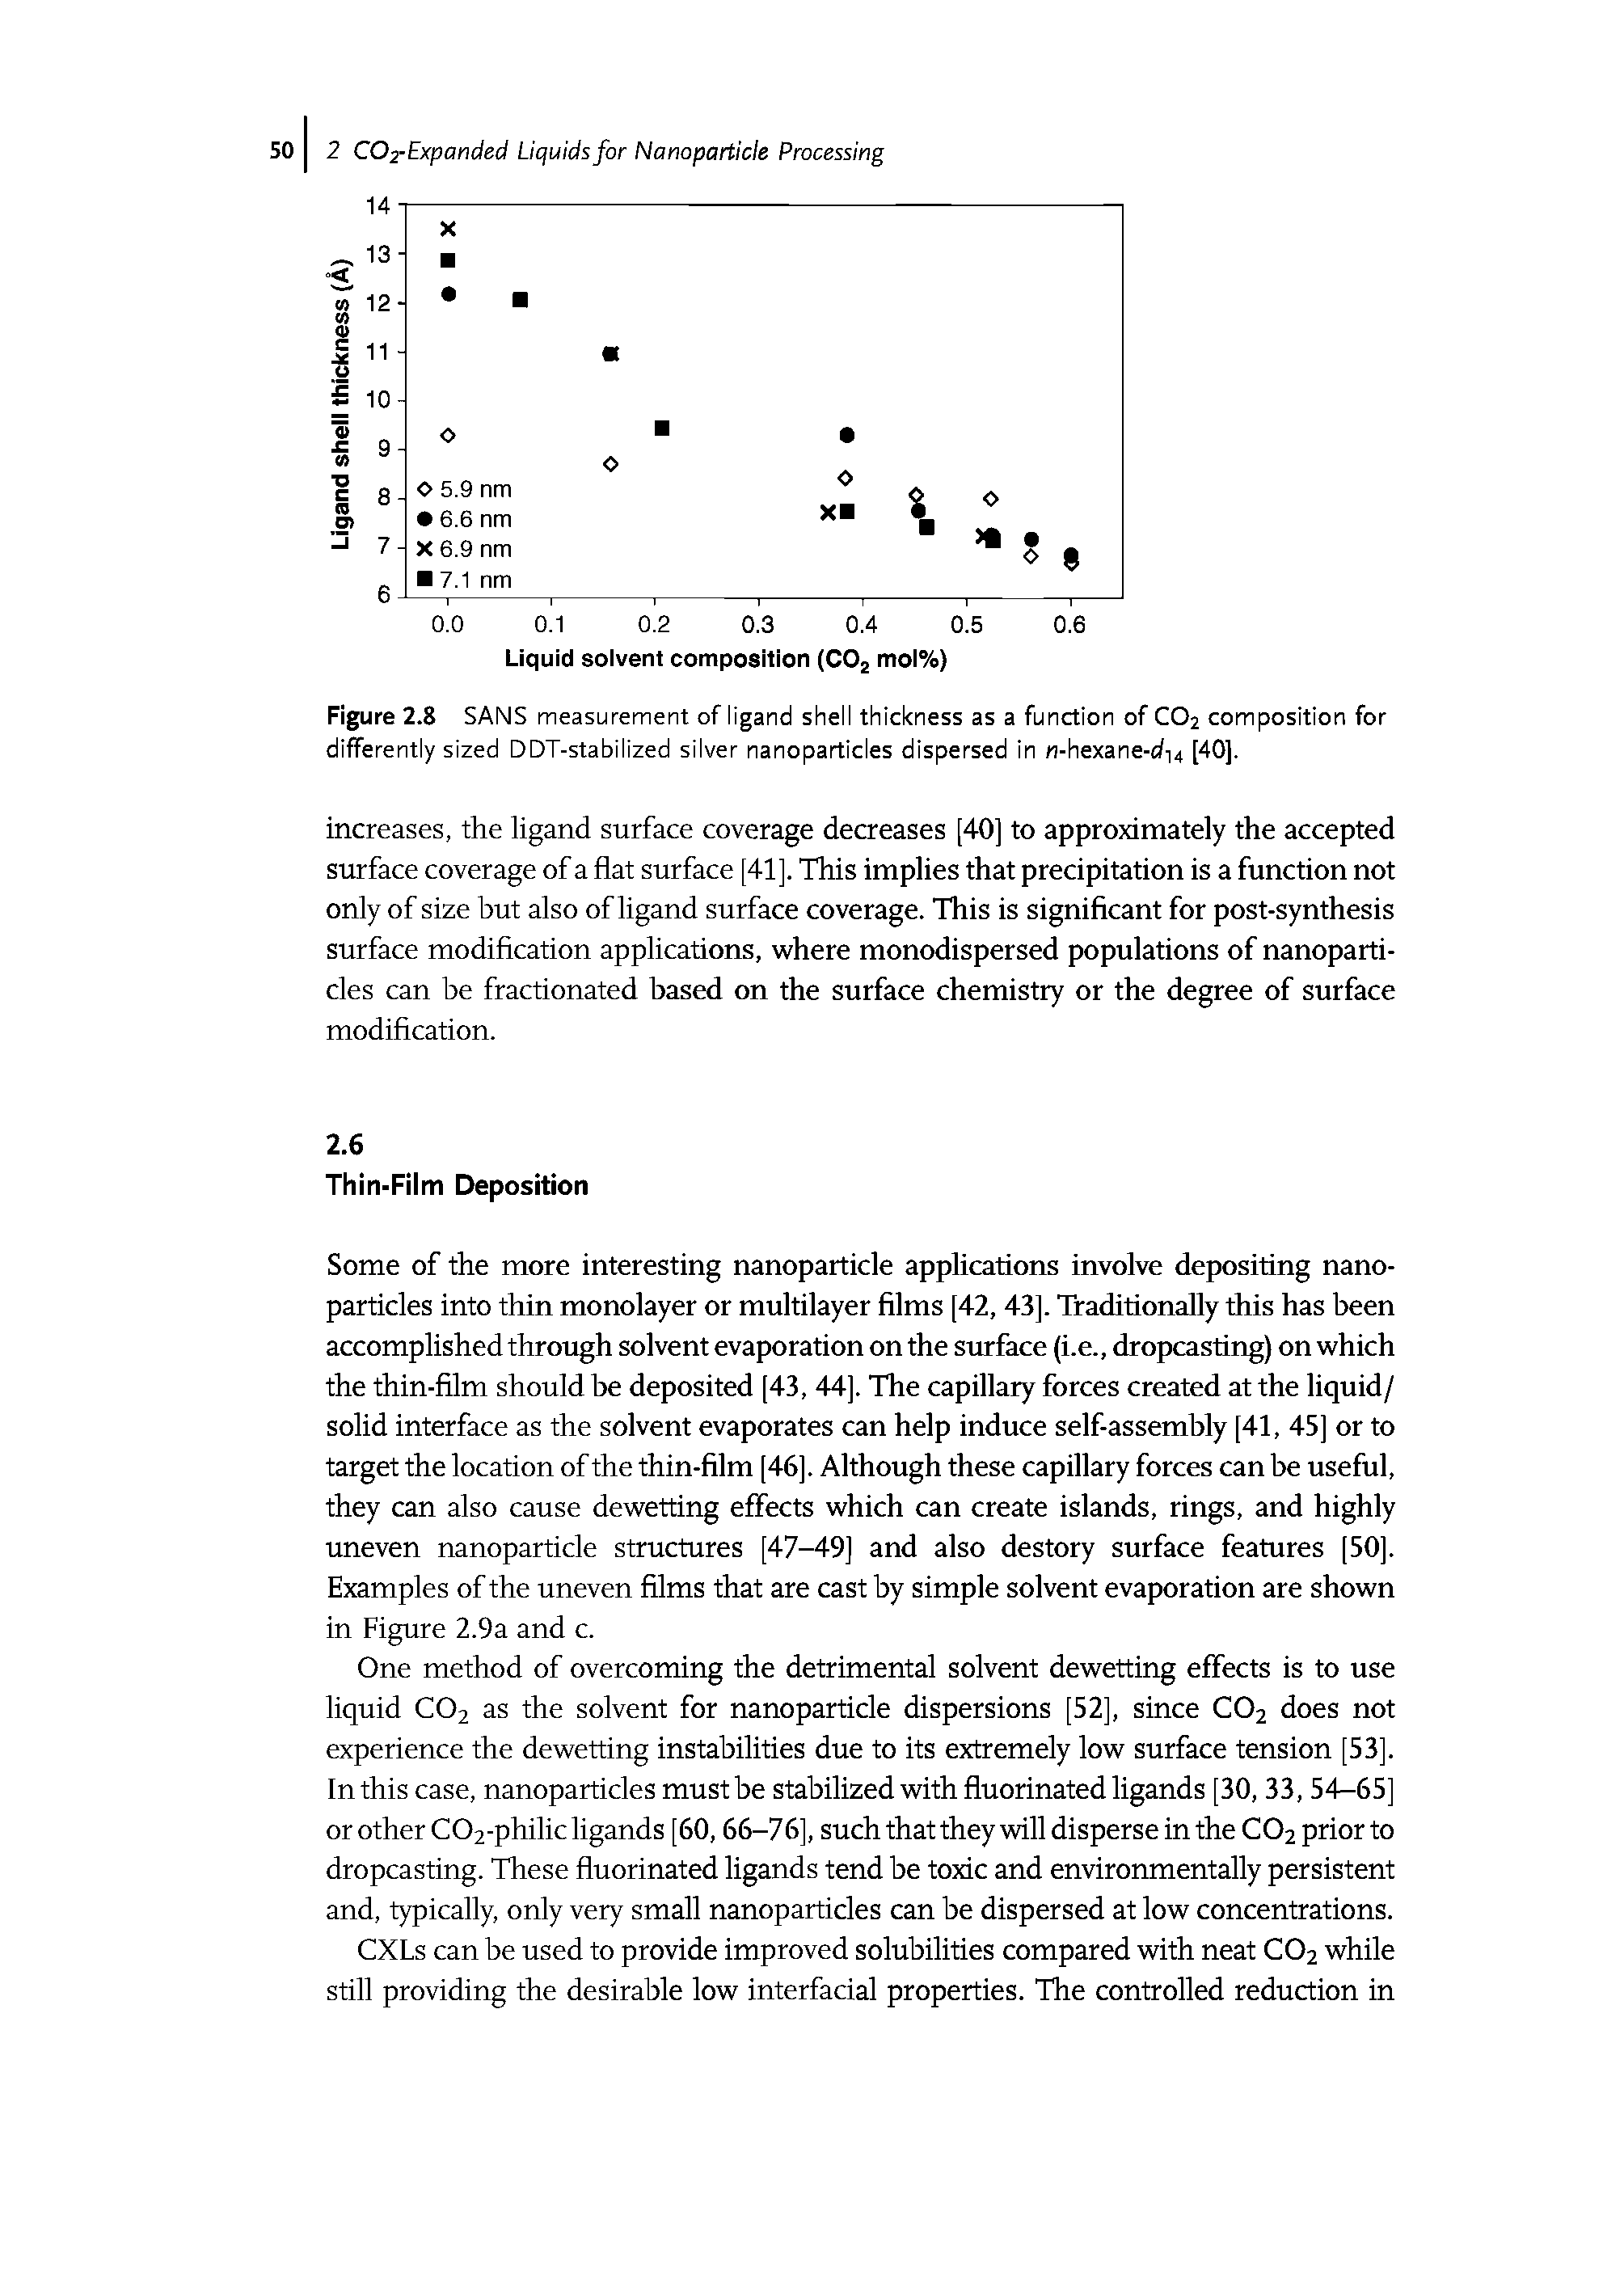 Figure 2.8 SANS measurement of ligand shell thickness as a function of C02 composition for differently sized DDT-stabilized silver nanoparticles dispersed in n-hexane-t/14 [40].